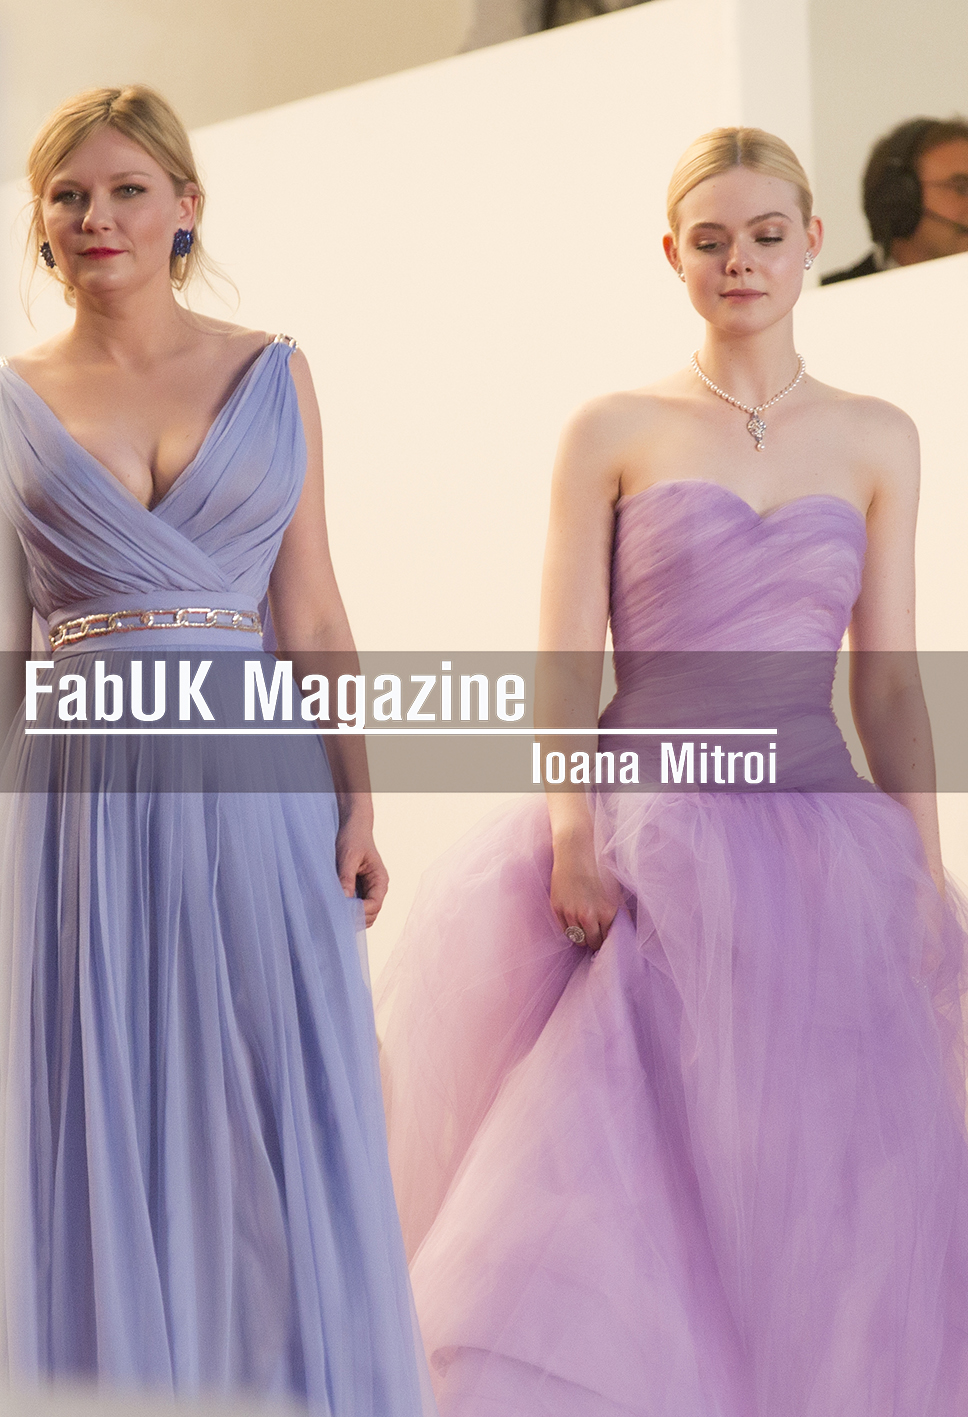 FabUK Magazine was in Cannes 42